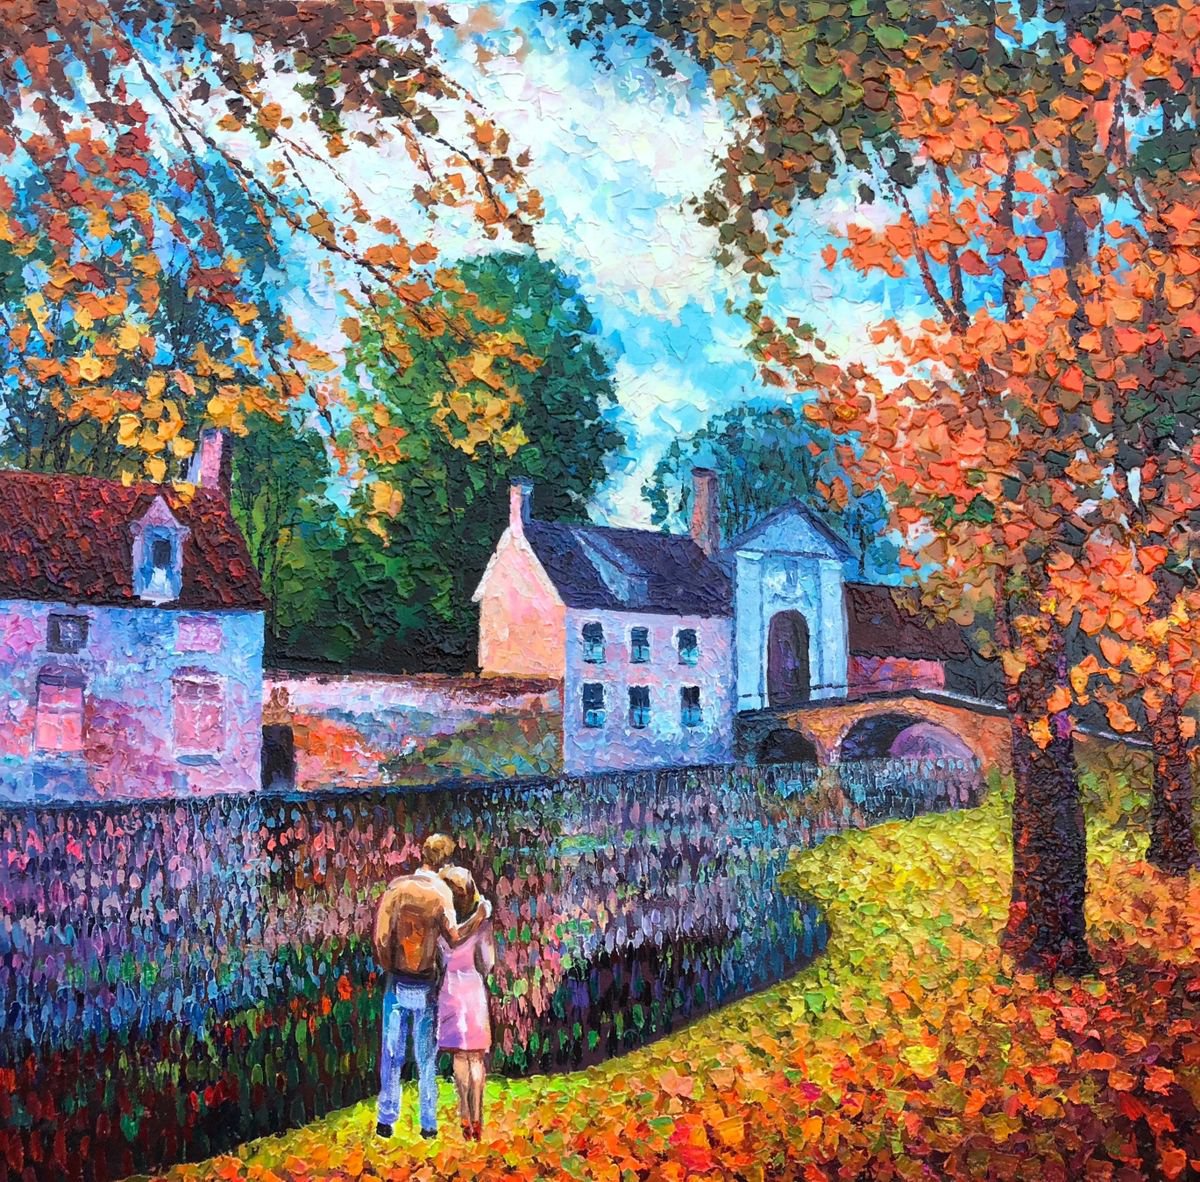 Keeping Time By the River 36 x 36 Original Painting by Alexander Antanenka by Alexander Antanenka